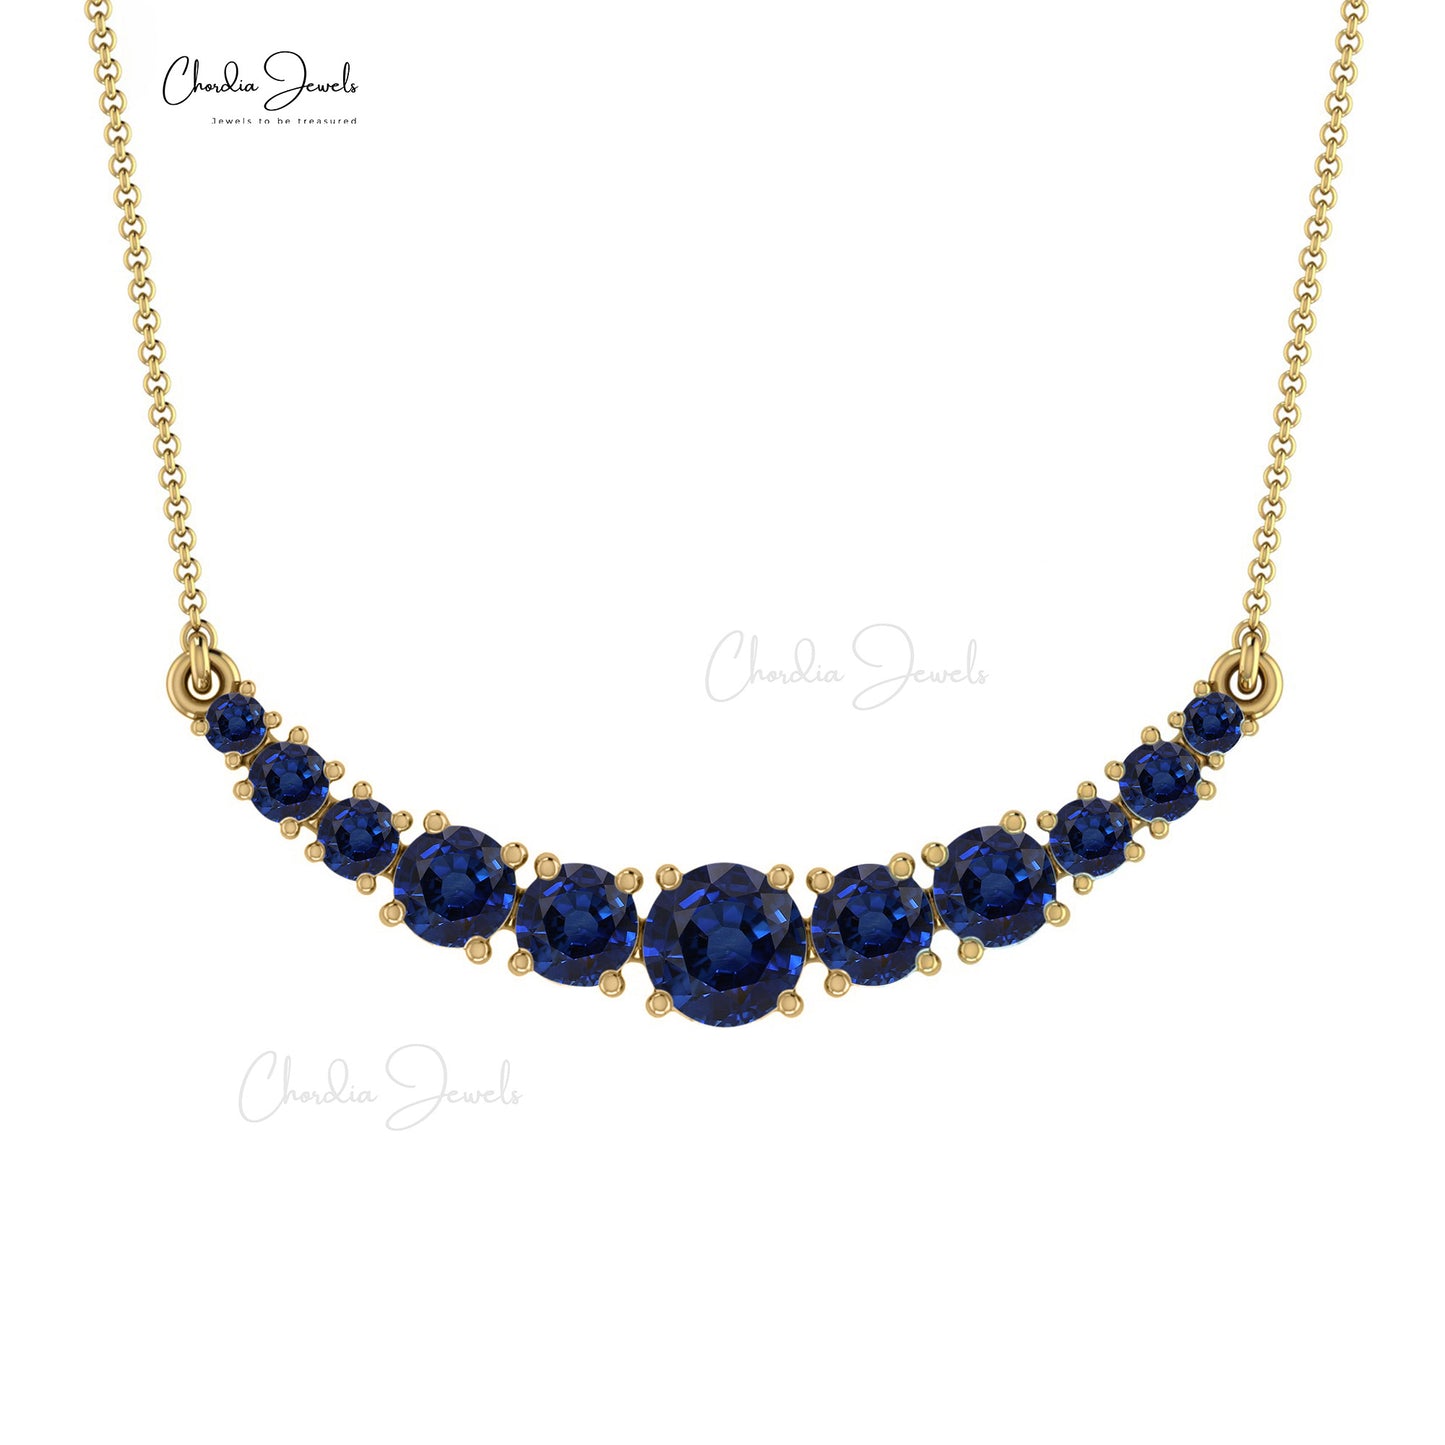 Buy Rajasthan Gems Blue Sapphire Oval Beads Treated Stones Necklace 2 Lines  280 Carats at Amazon.in